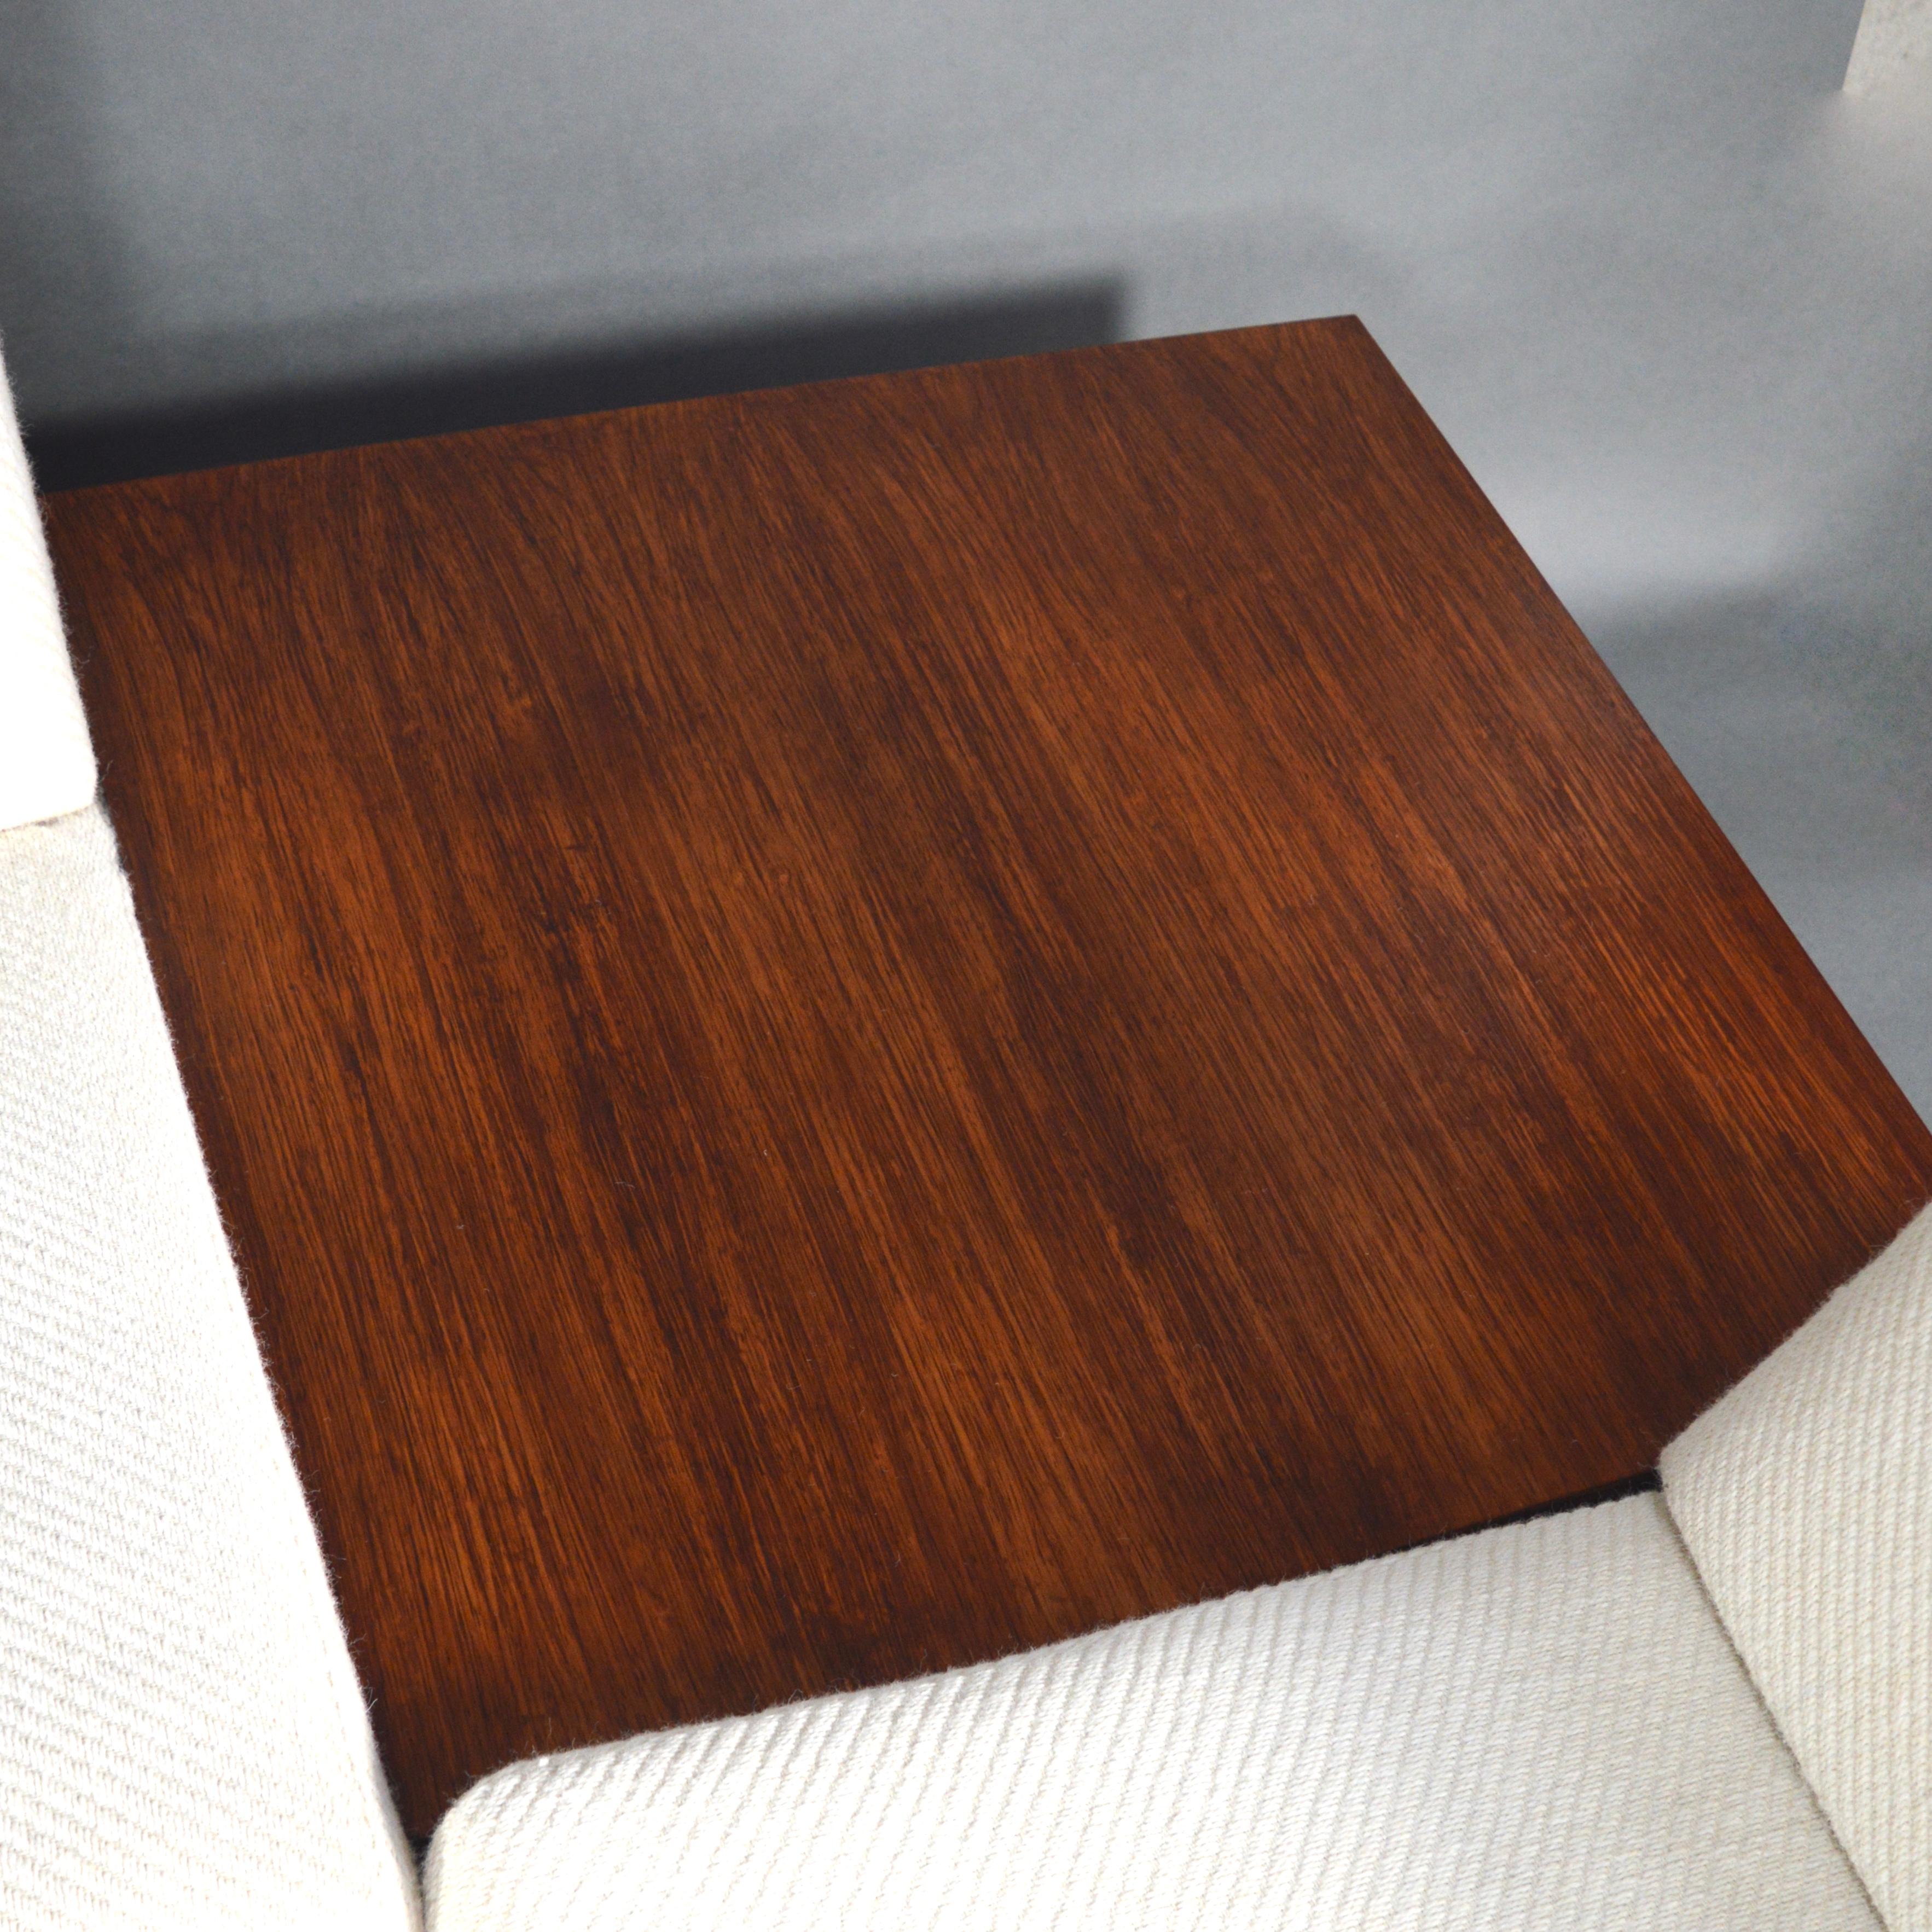 Rolf Benz First Edition Pluraform Sofa with Rosewood Coffee Tables, 1964 8